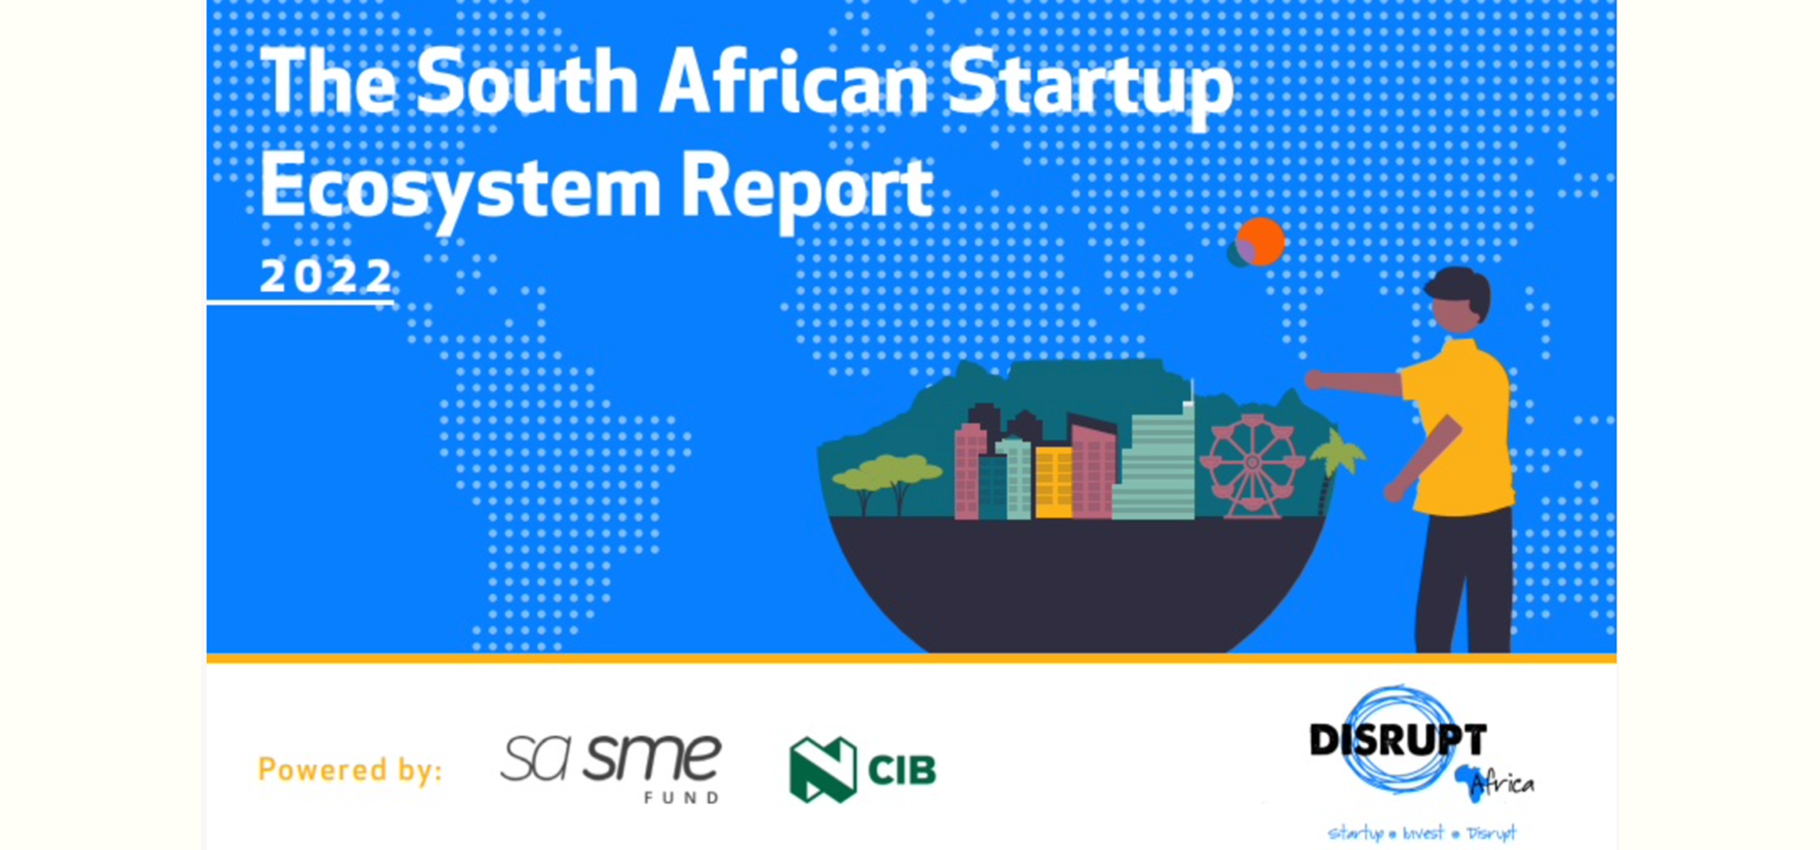 South Africa is a startup powerhouse that leads the continent for exits, finds new report